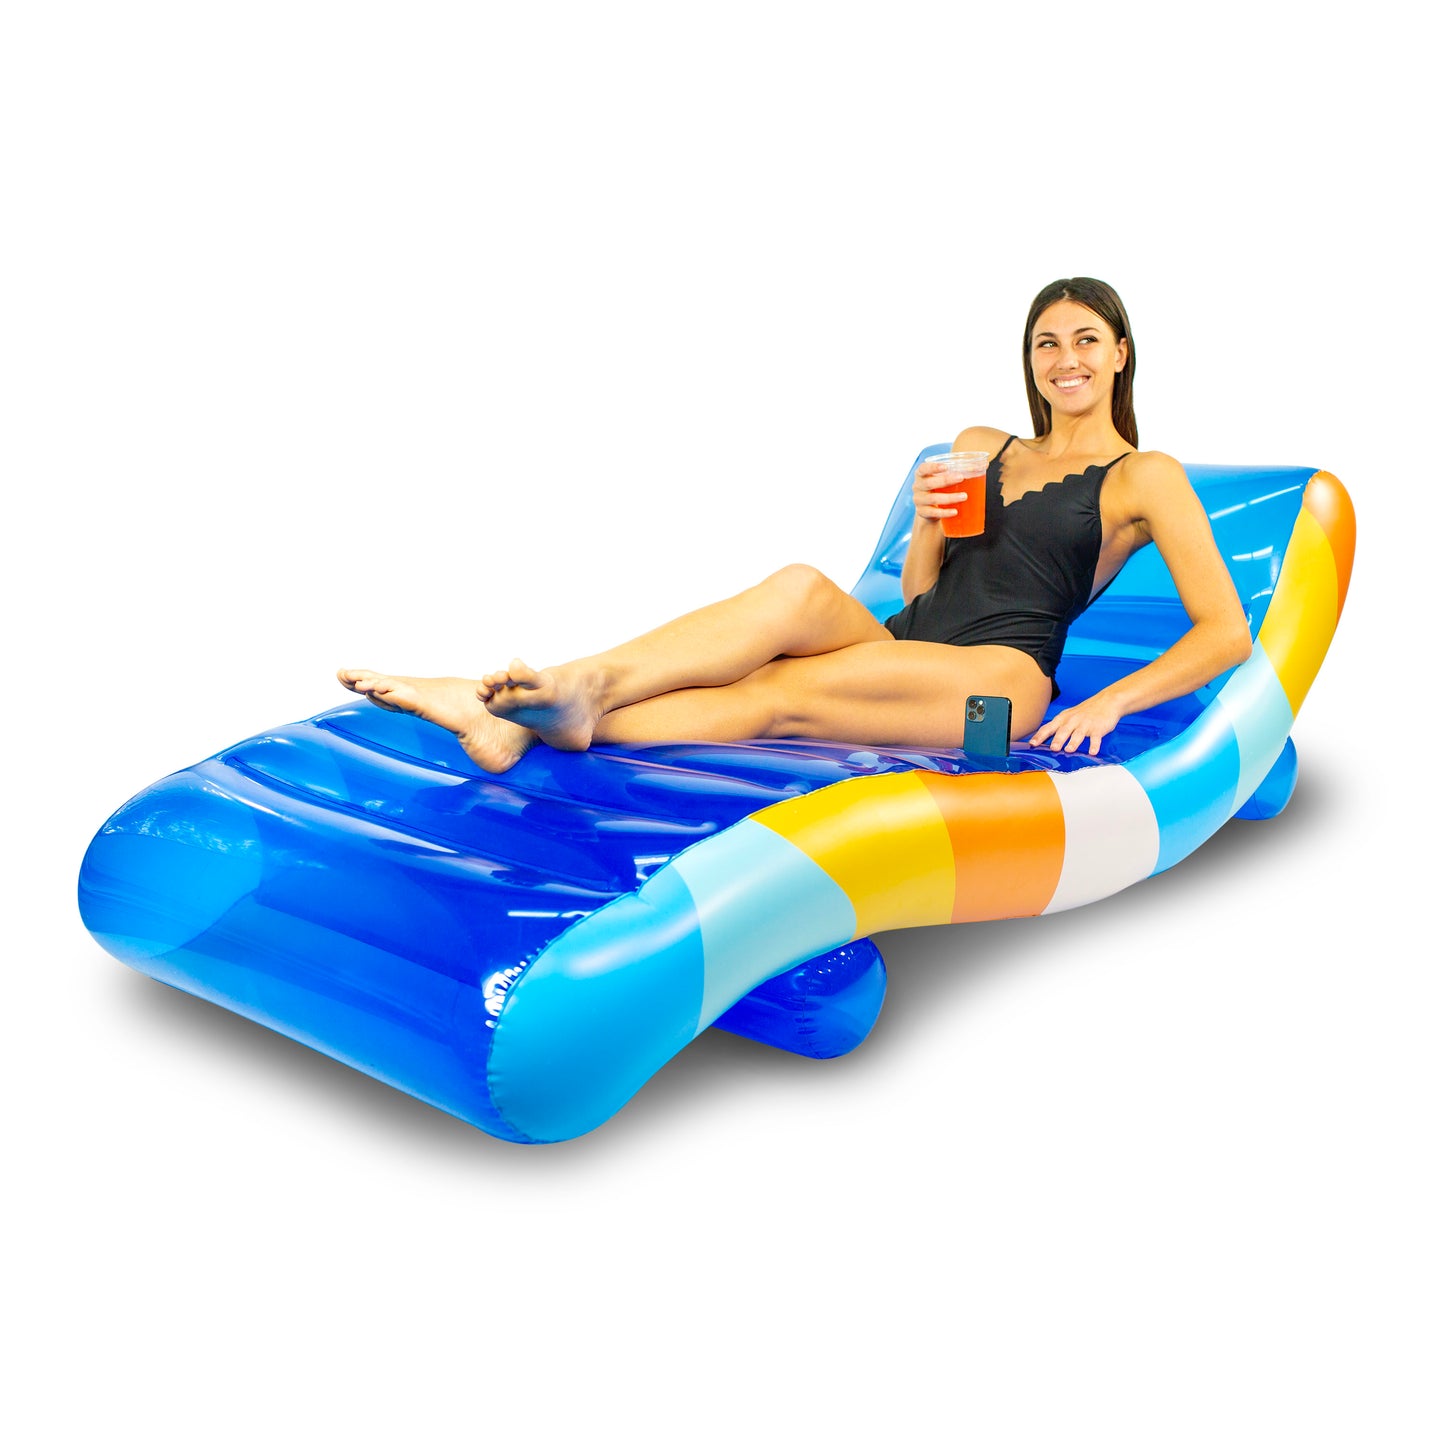 Good Vibes Deluxe Chaise Lounger inflatable pool raft.